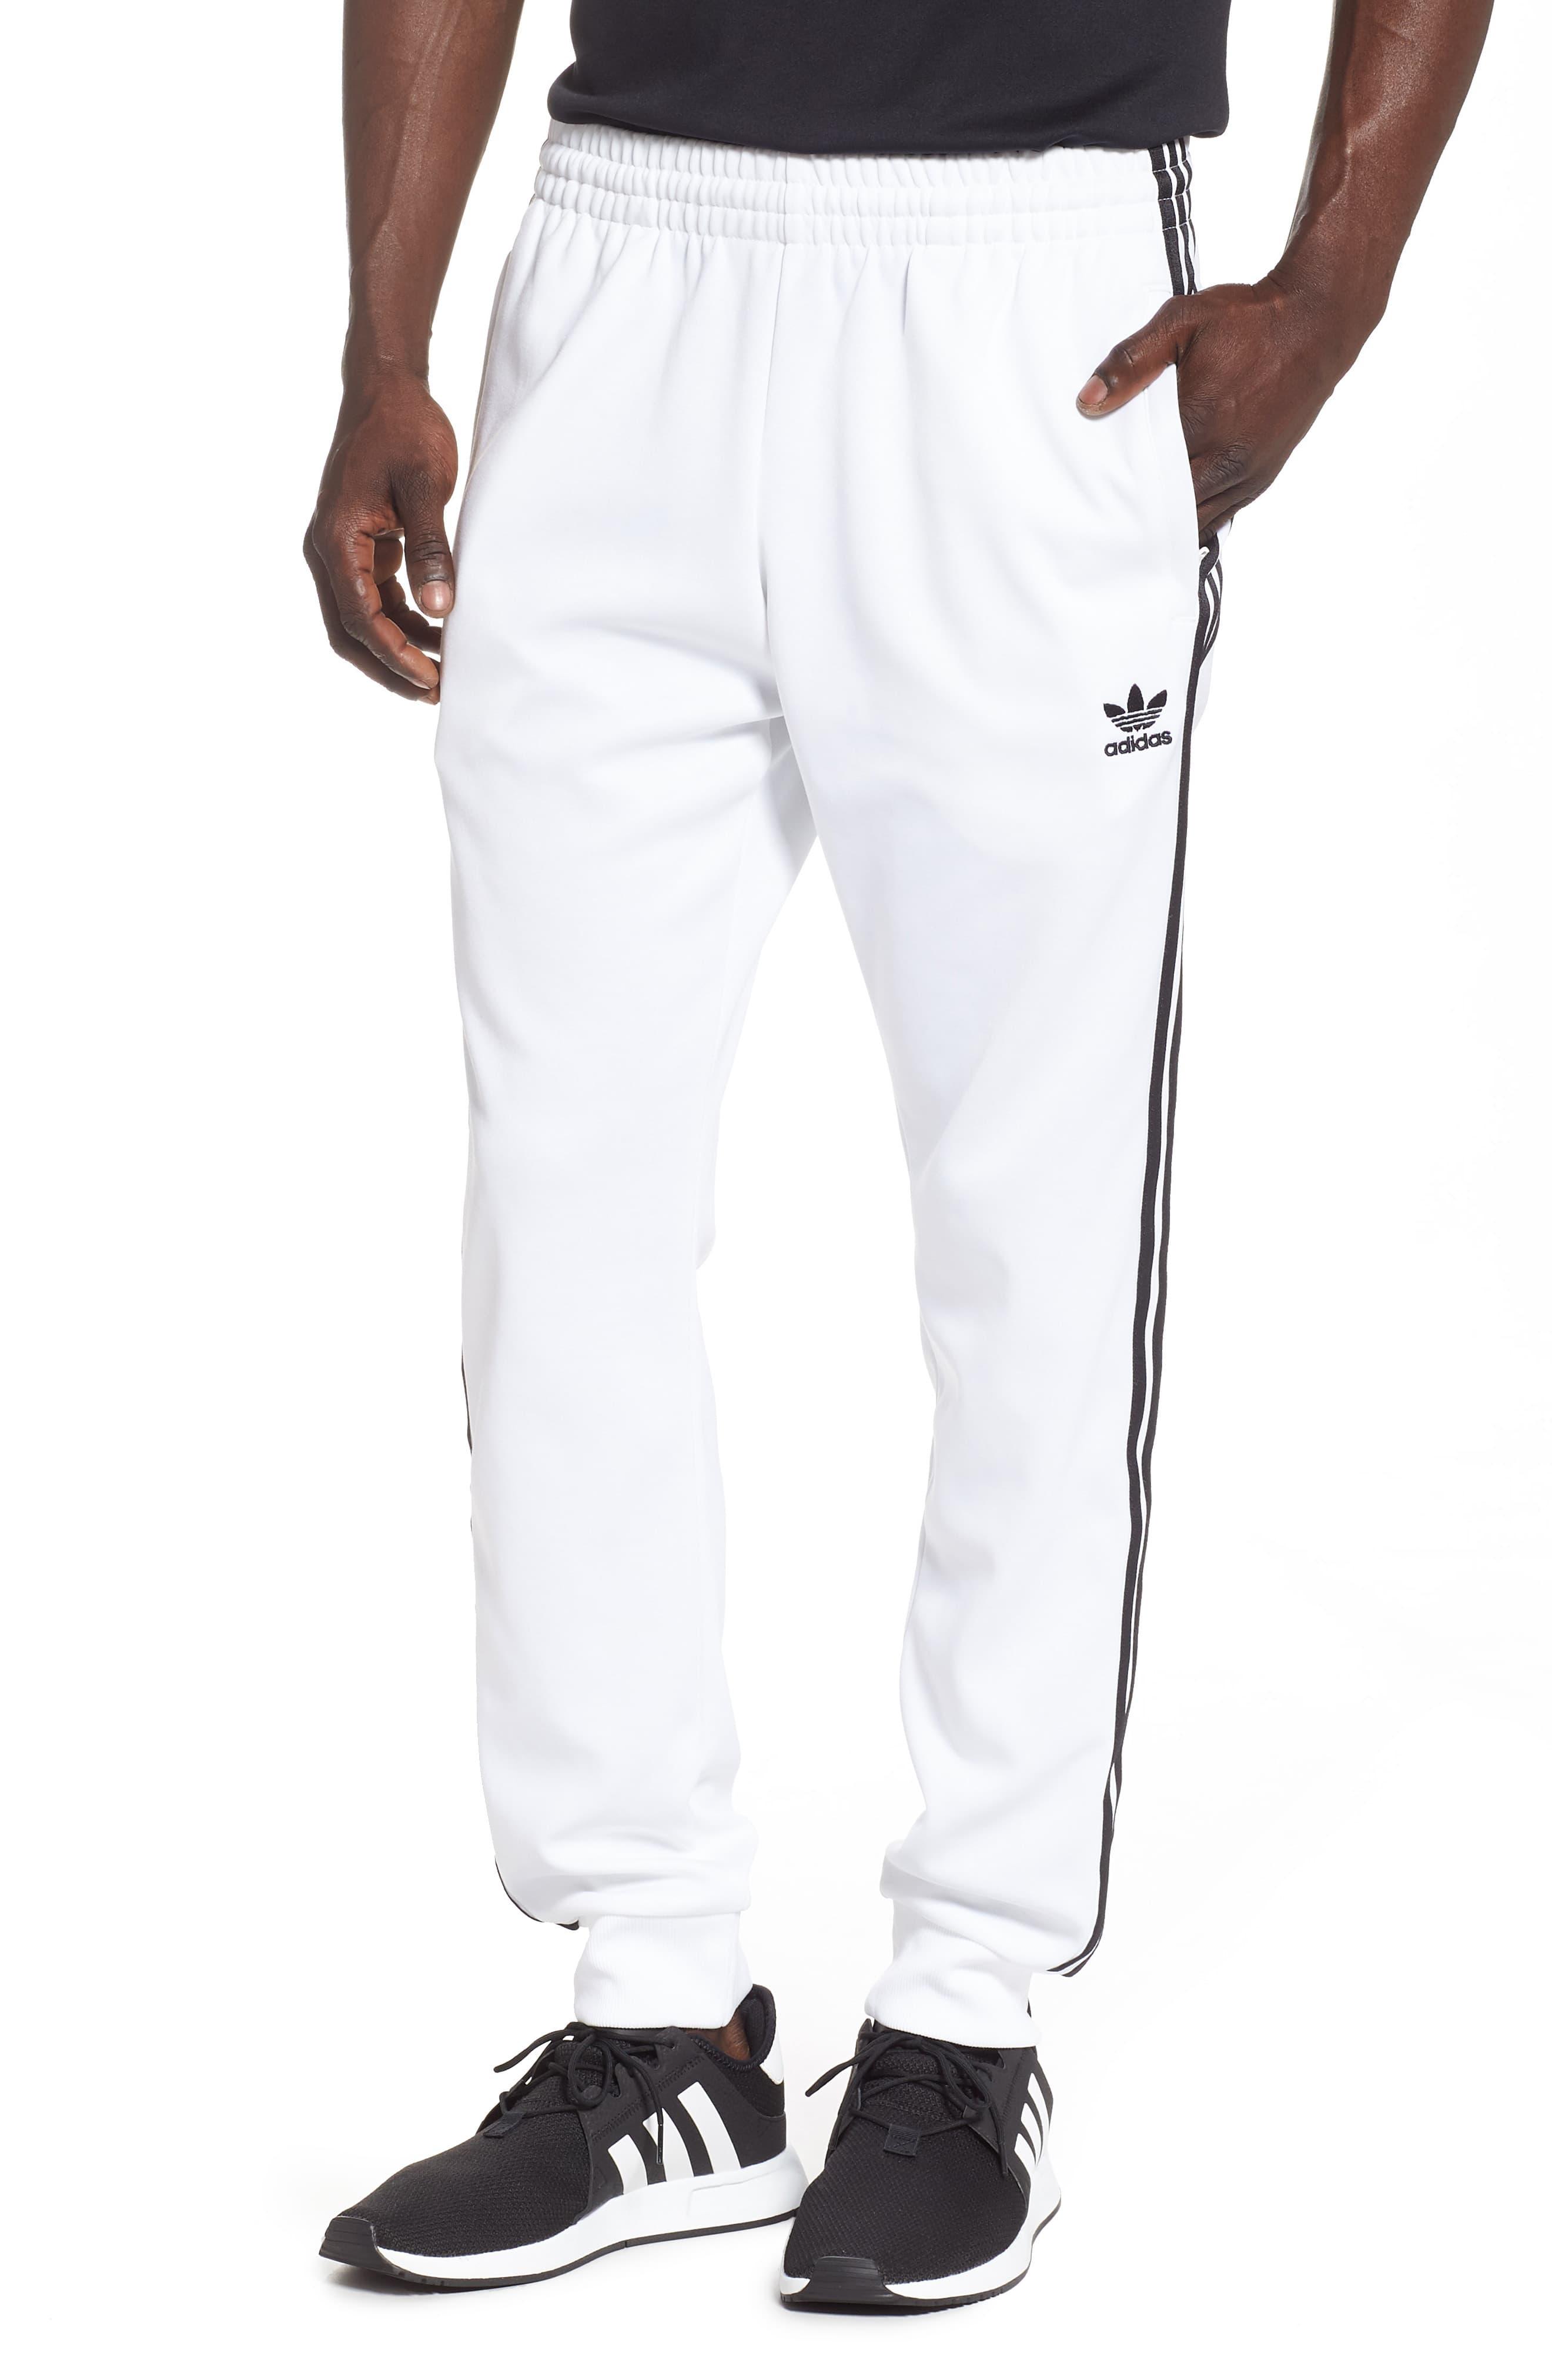 adidas Originals Sst Track Pants in White for Men - Lyst